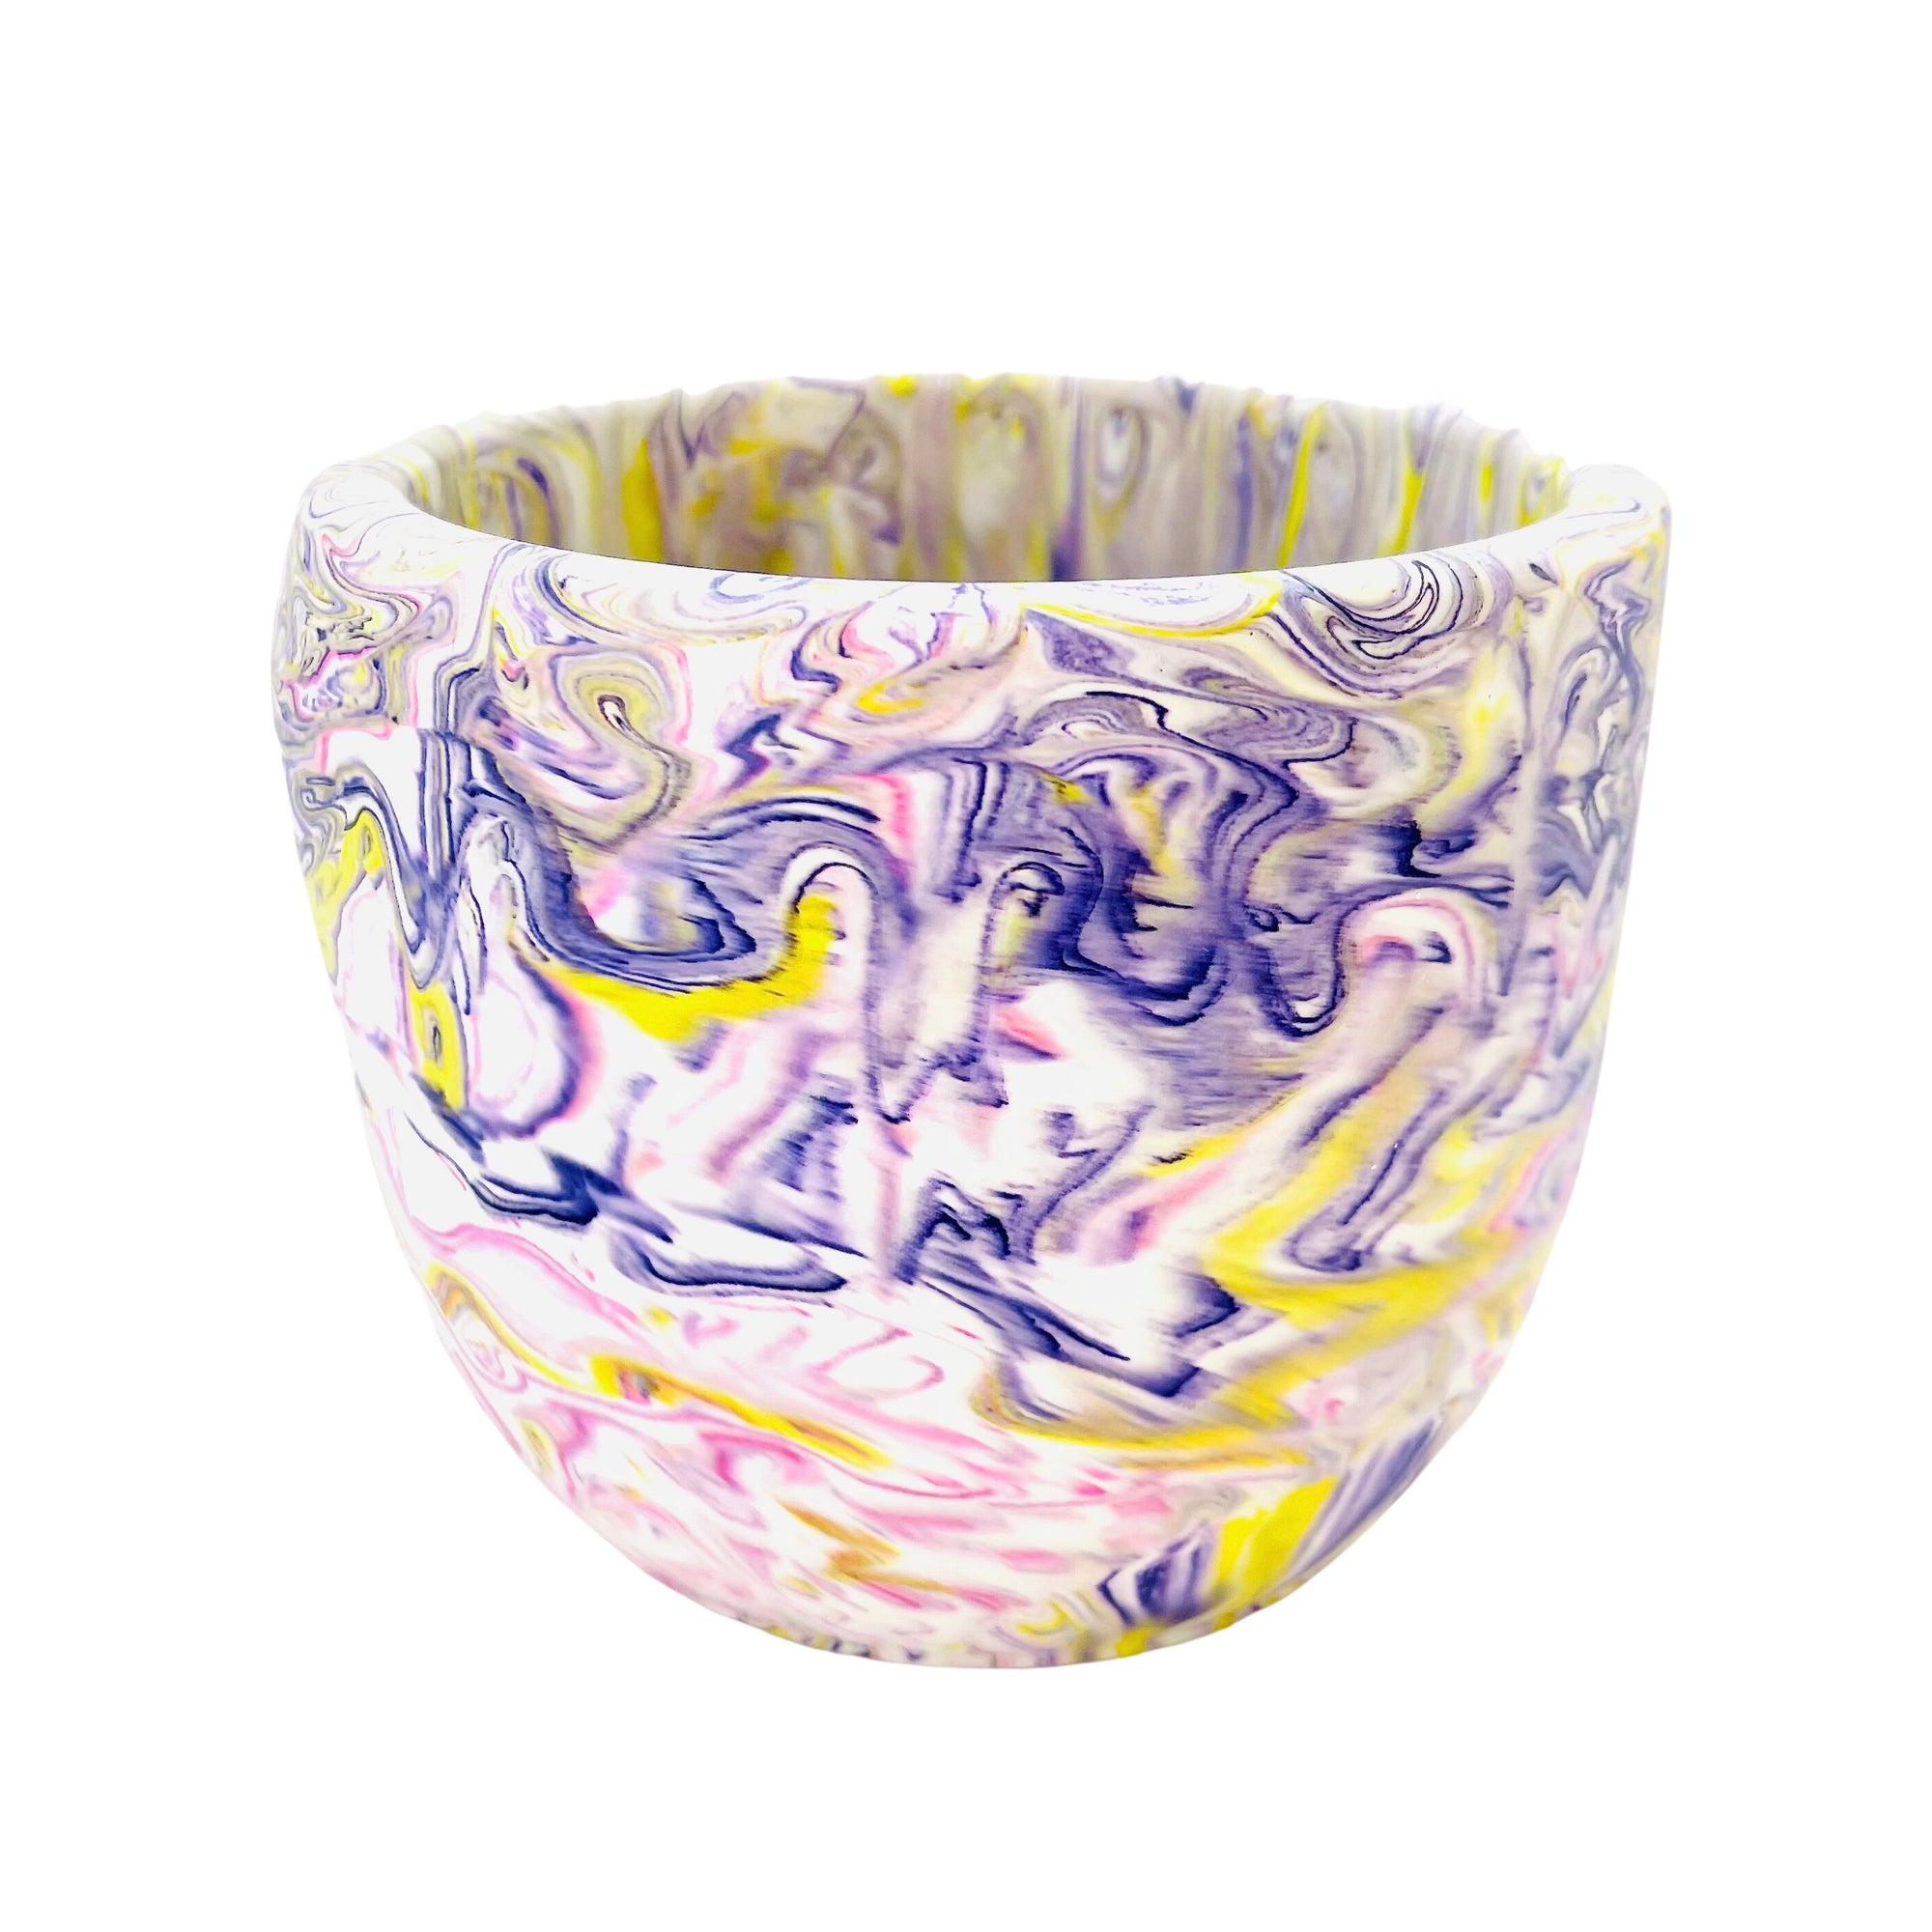 A  soft edged Jesmonite flower pot measuring 12.8cm in diameter,  marbled with swirls of purple, magenta and yellow pigment.